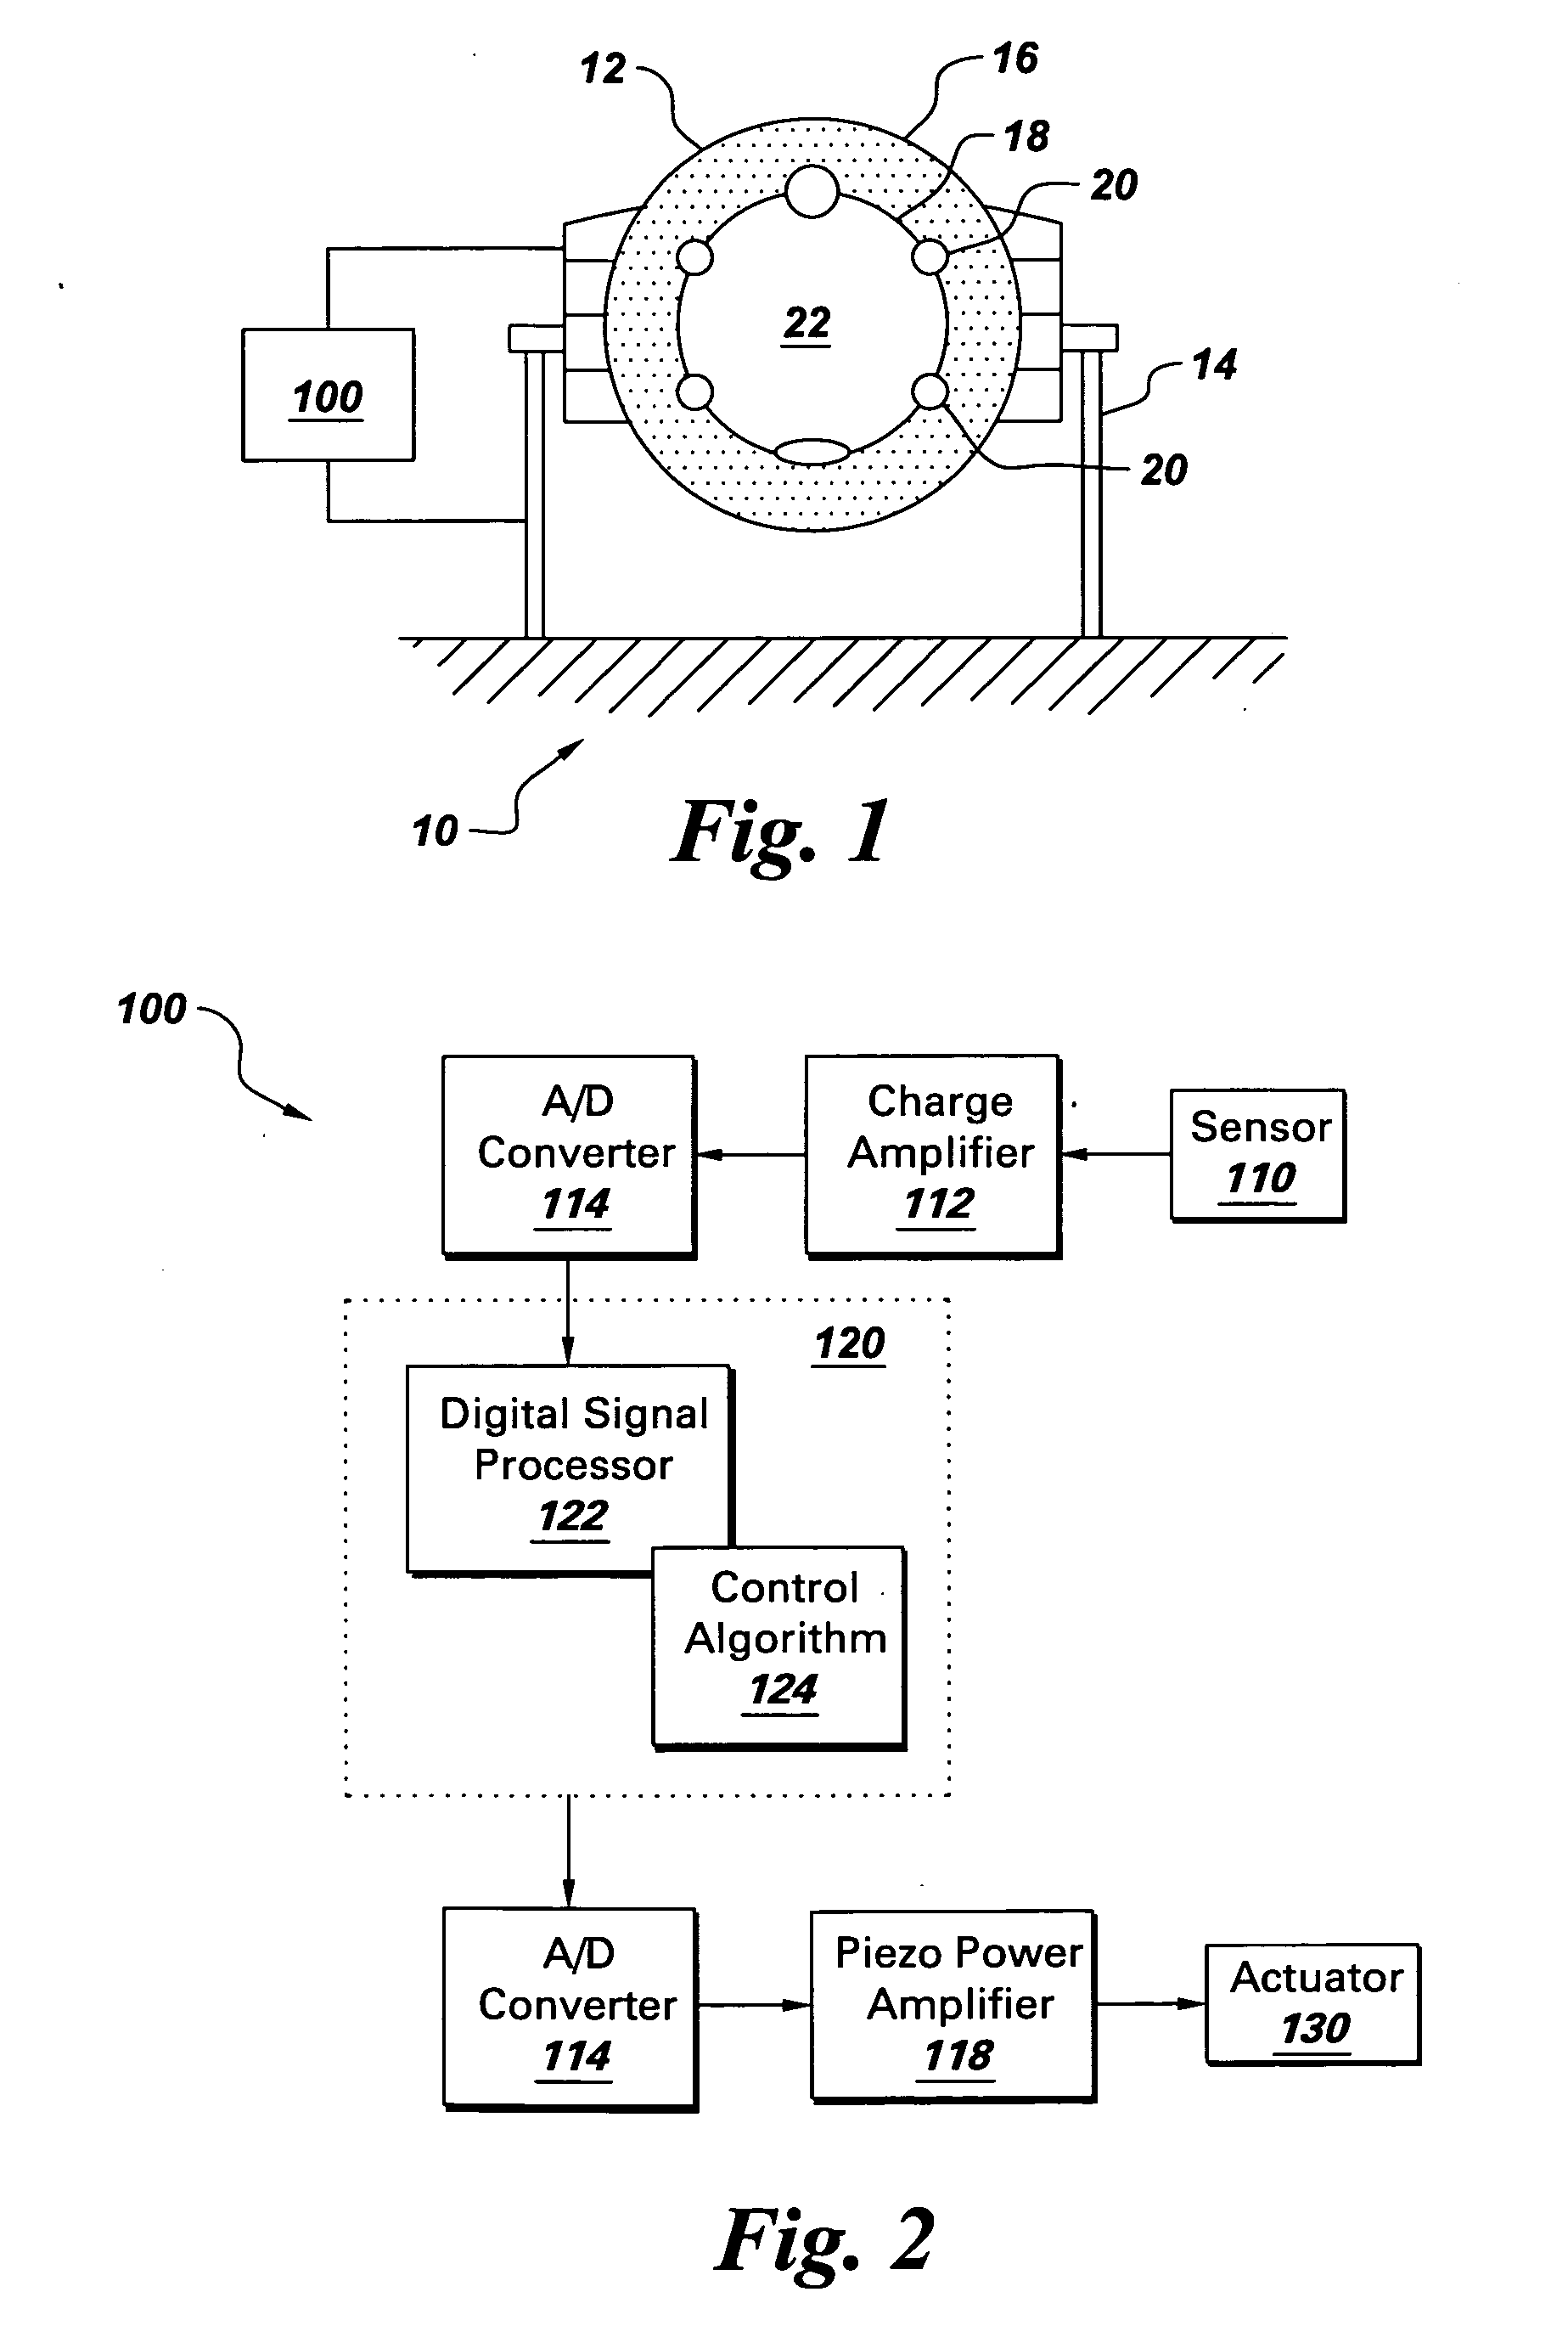 Active vibration control in computed tomography systems